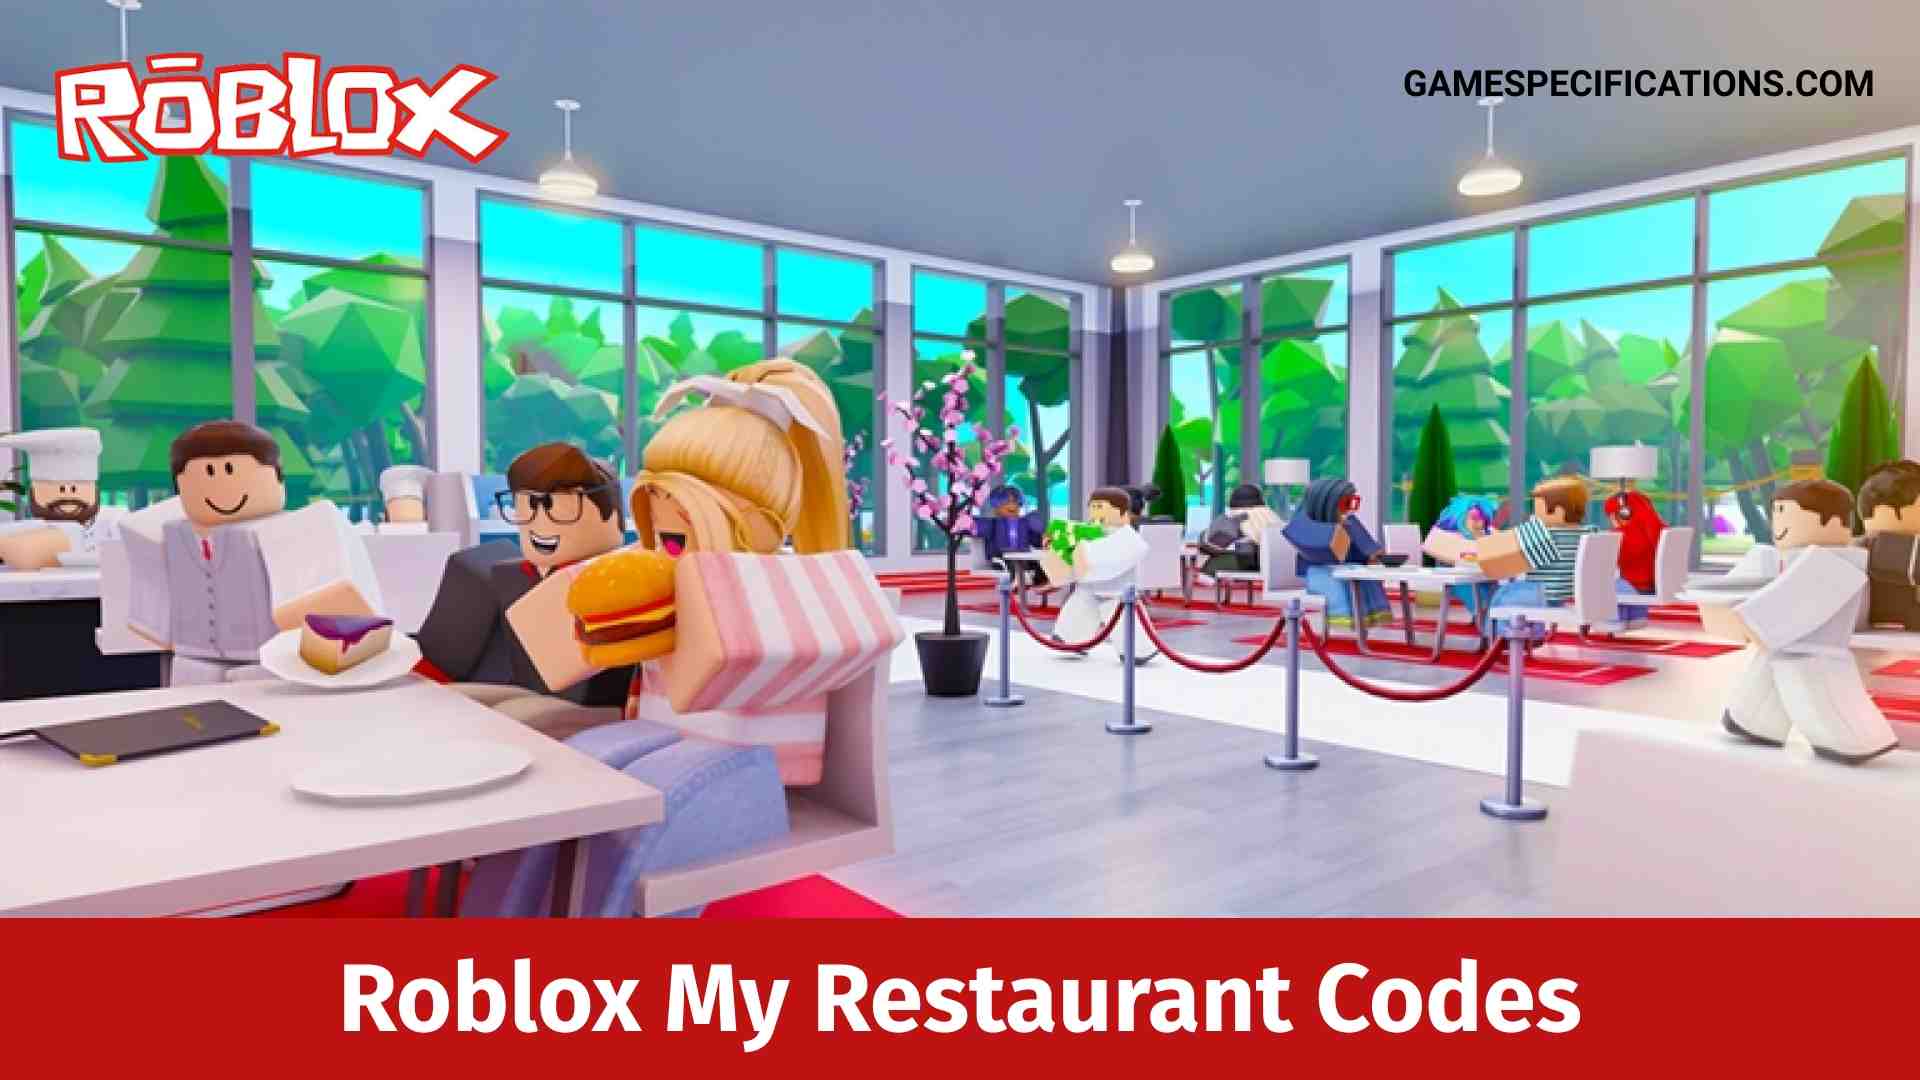 4 Working Roblox My Restaurant Codes July 2021 Game Specifications - roblox bloxburg picture codes for restaurants